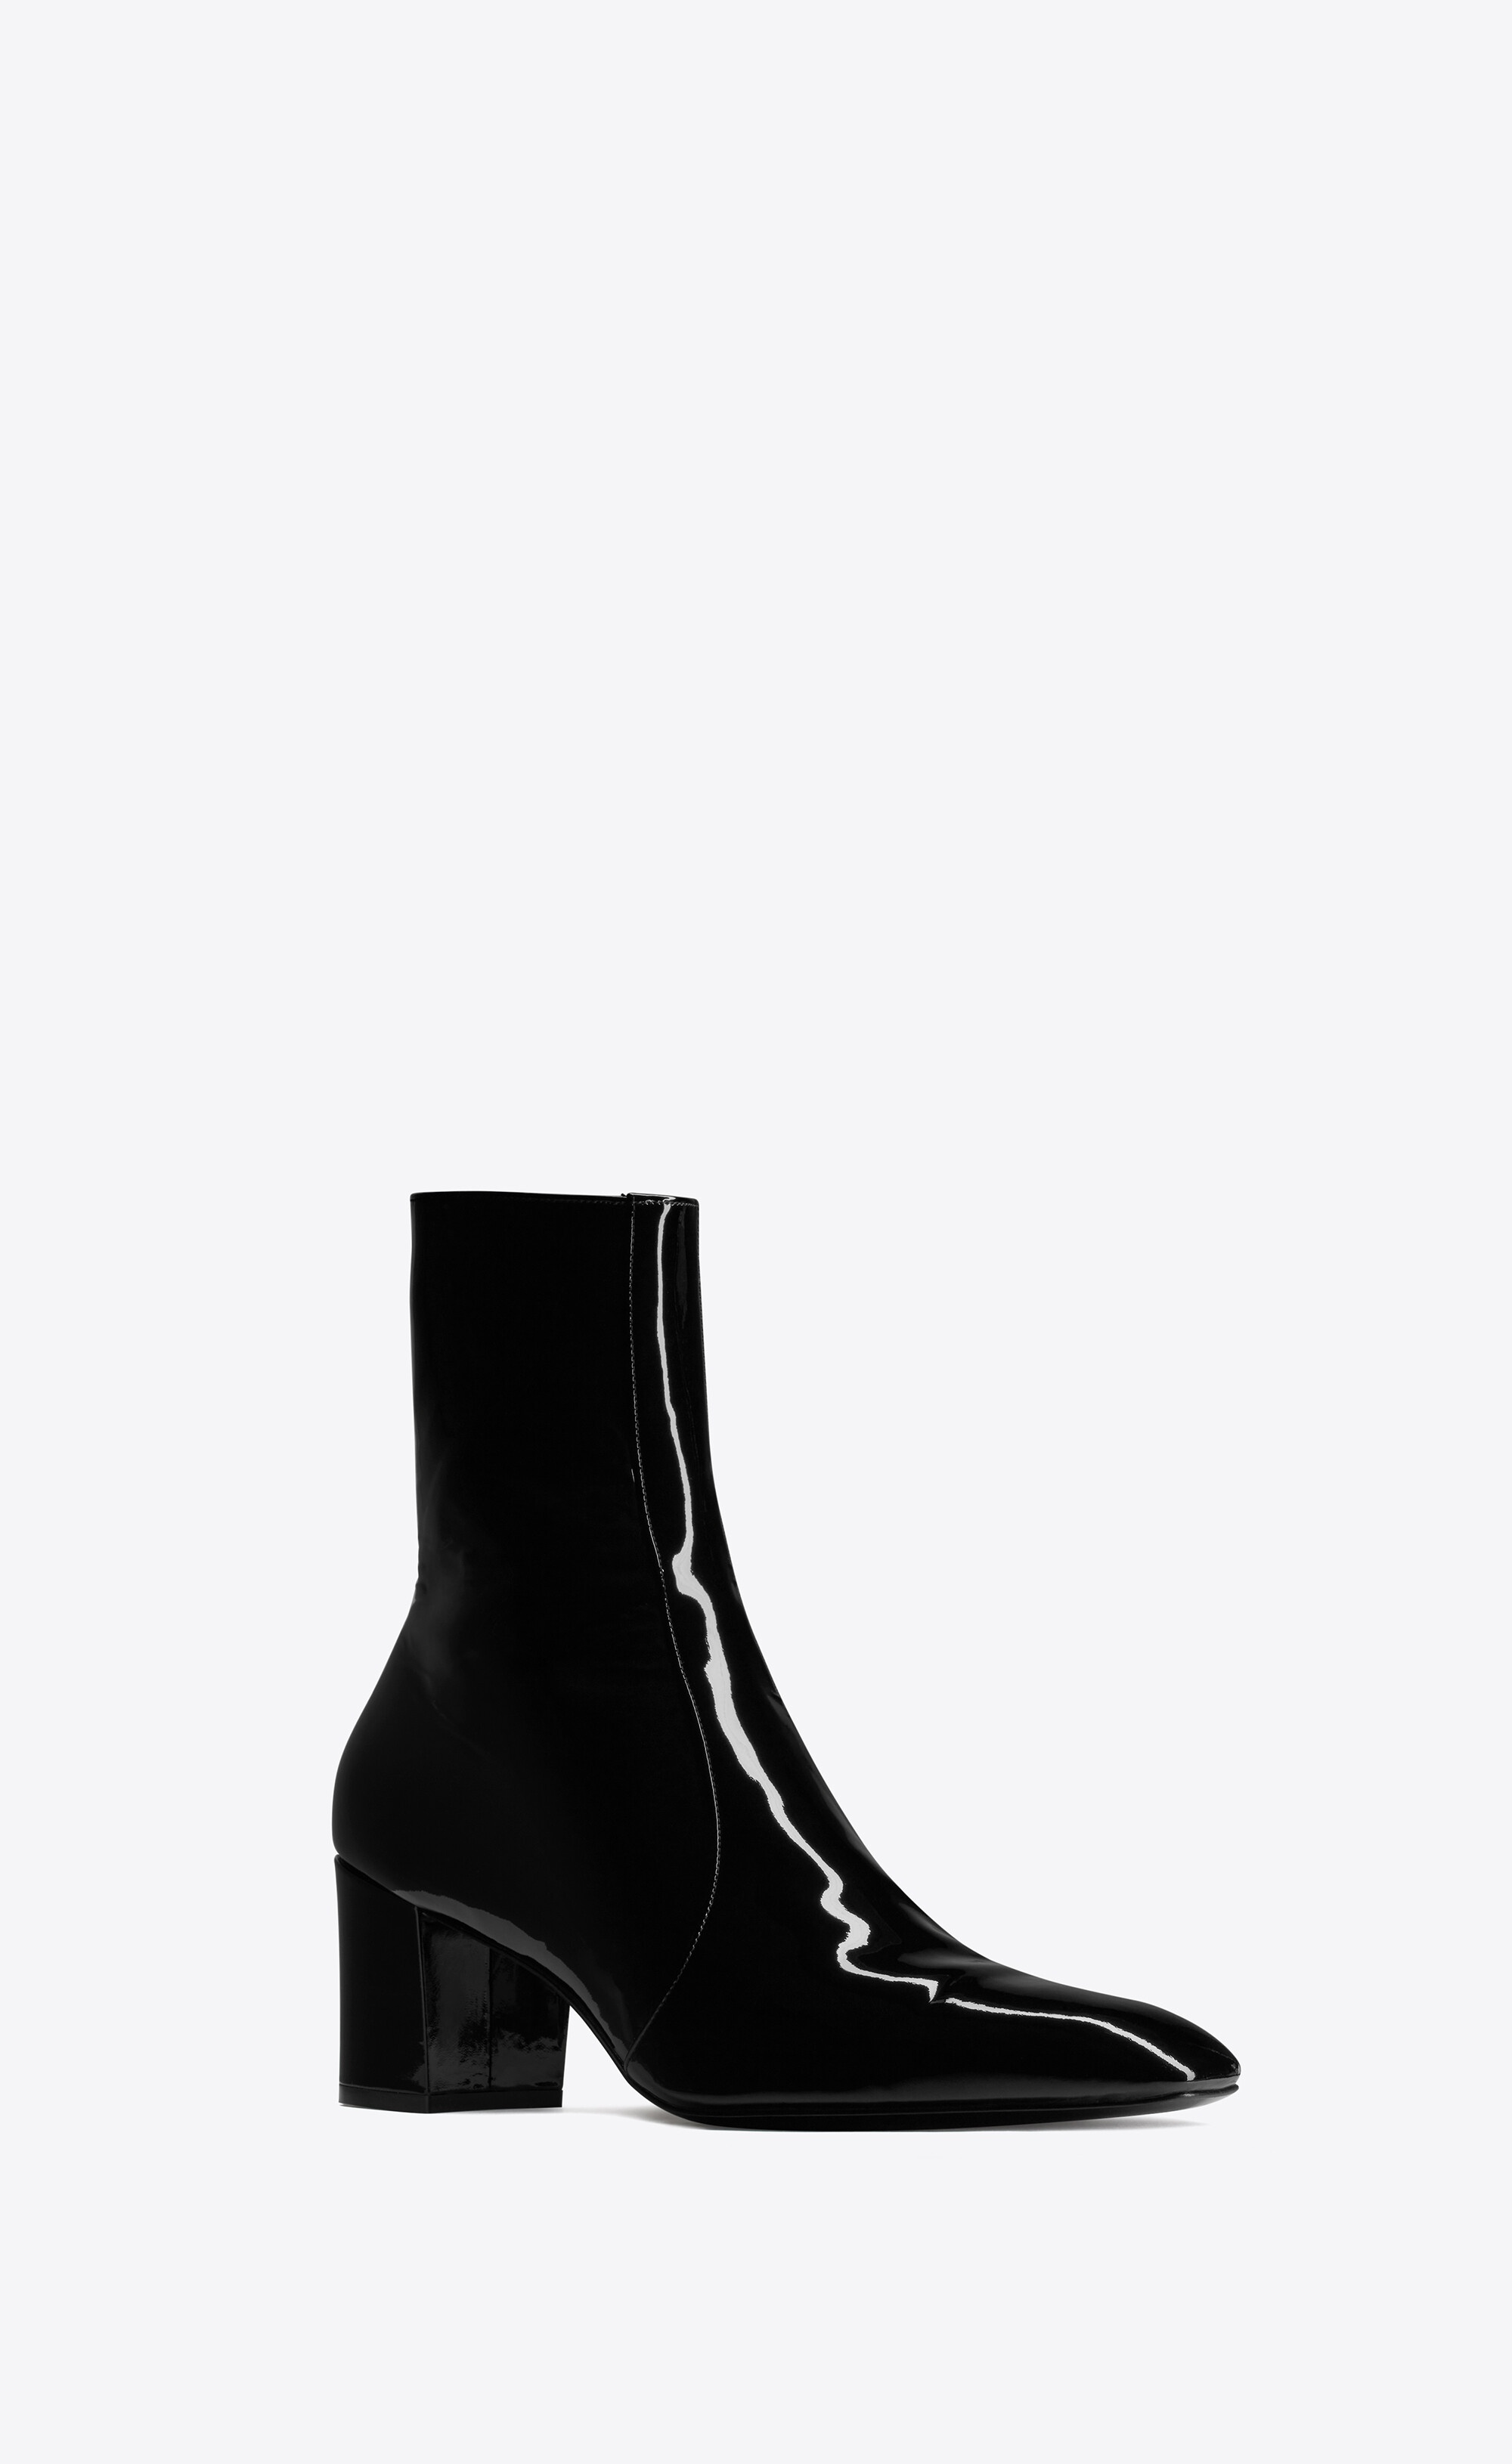 xiv zipped boots in patent leather - 4